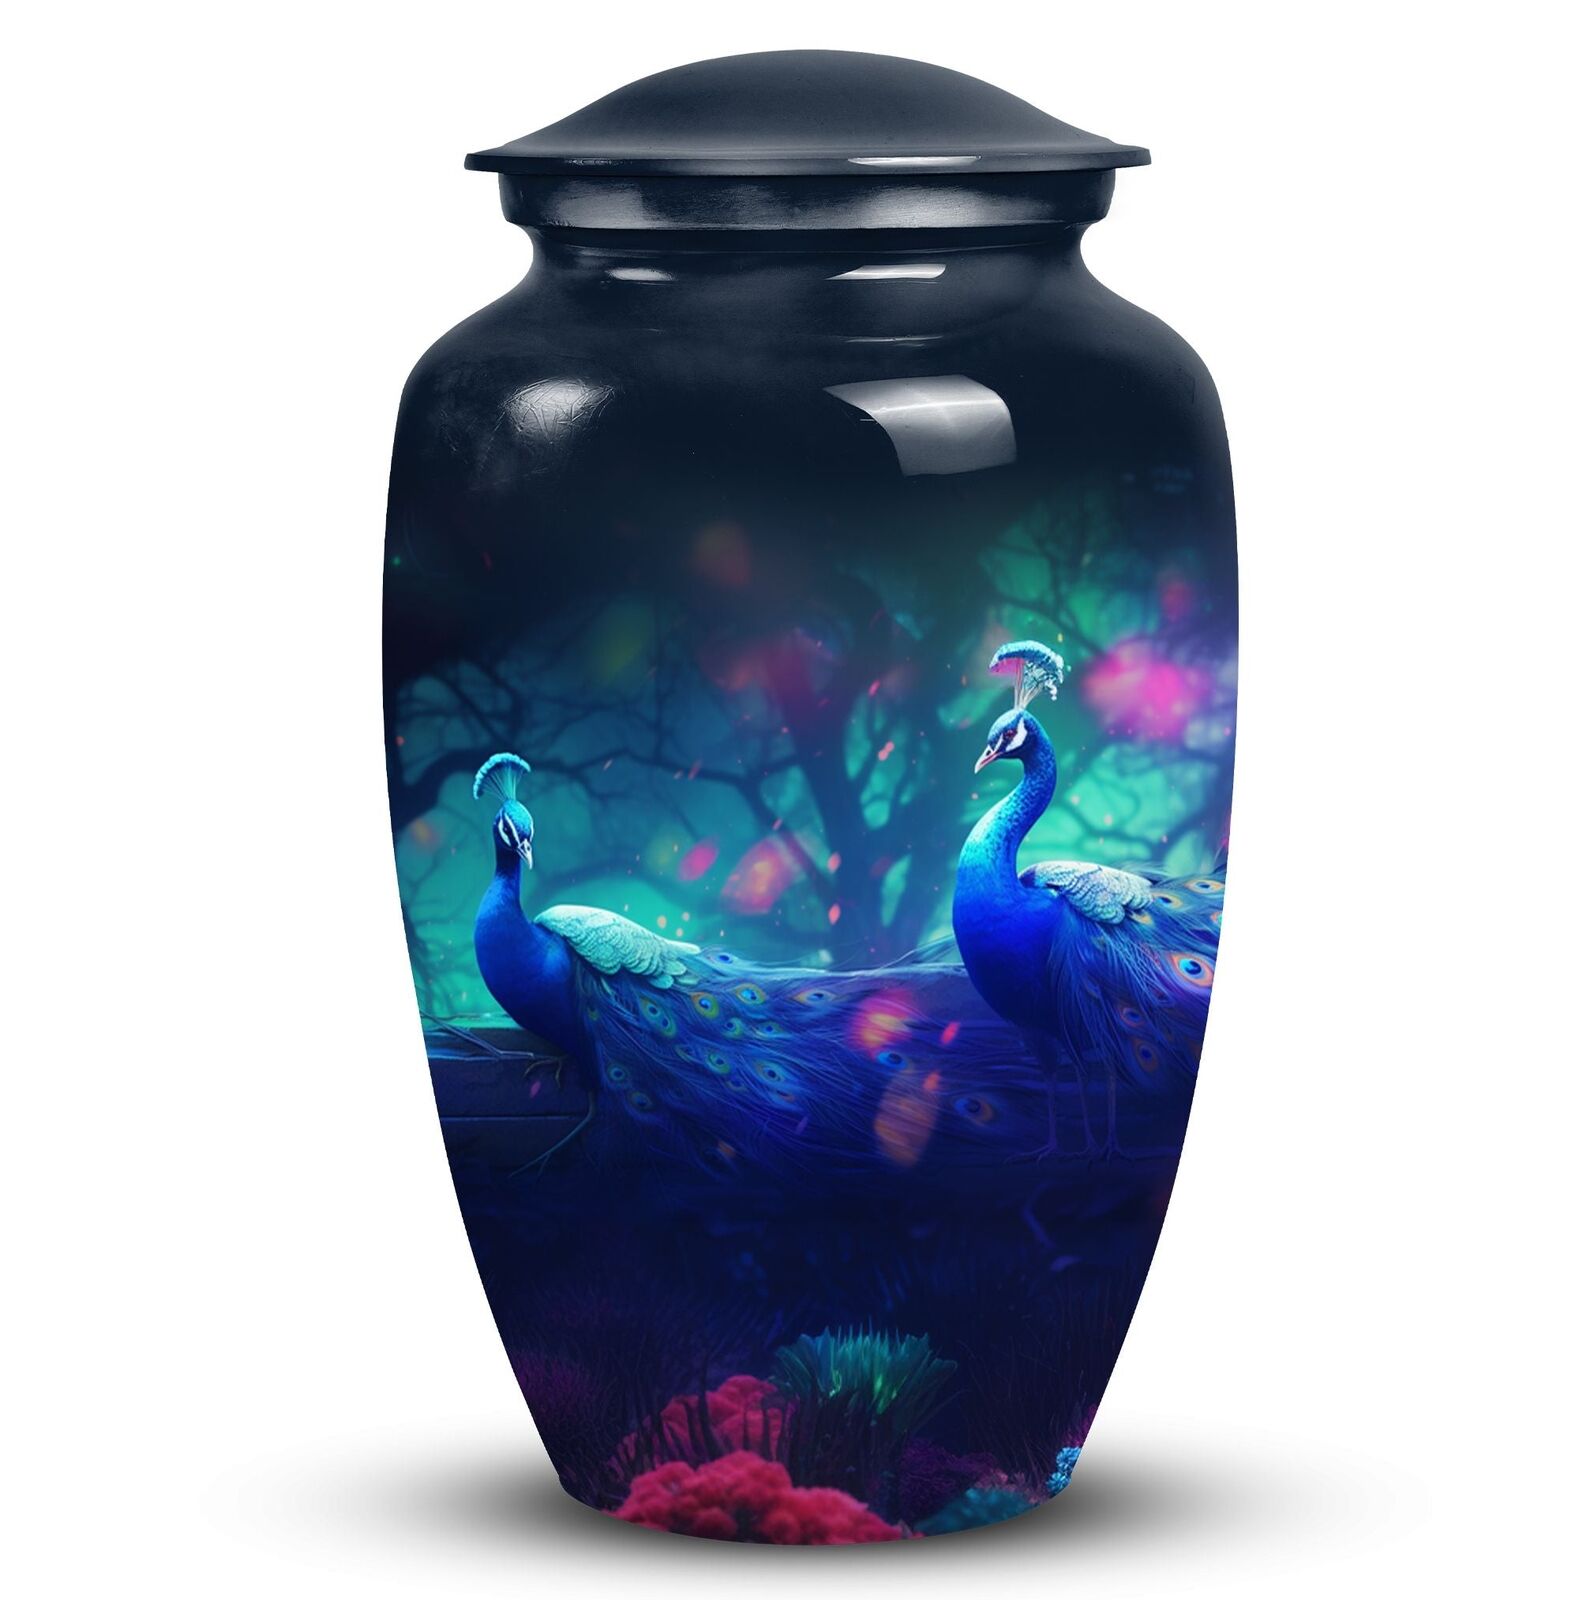 Peacock Burial Adult Cremation Urns for Human Ashes